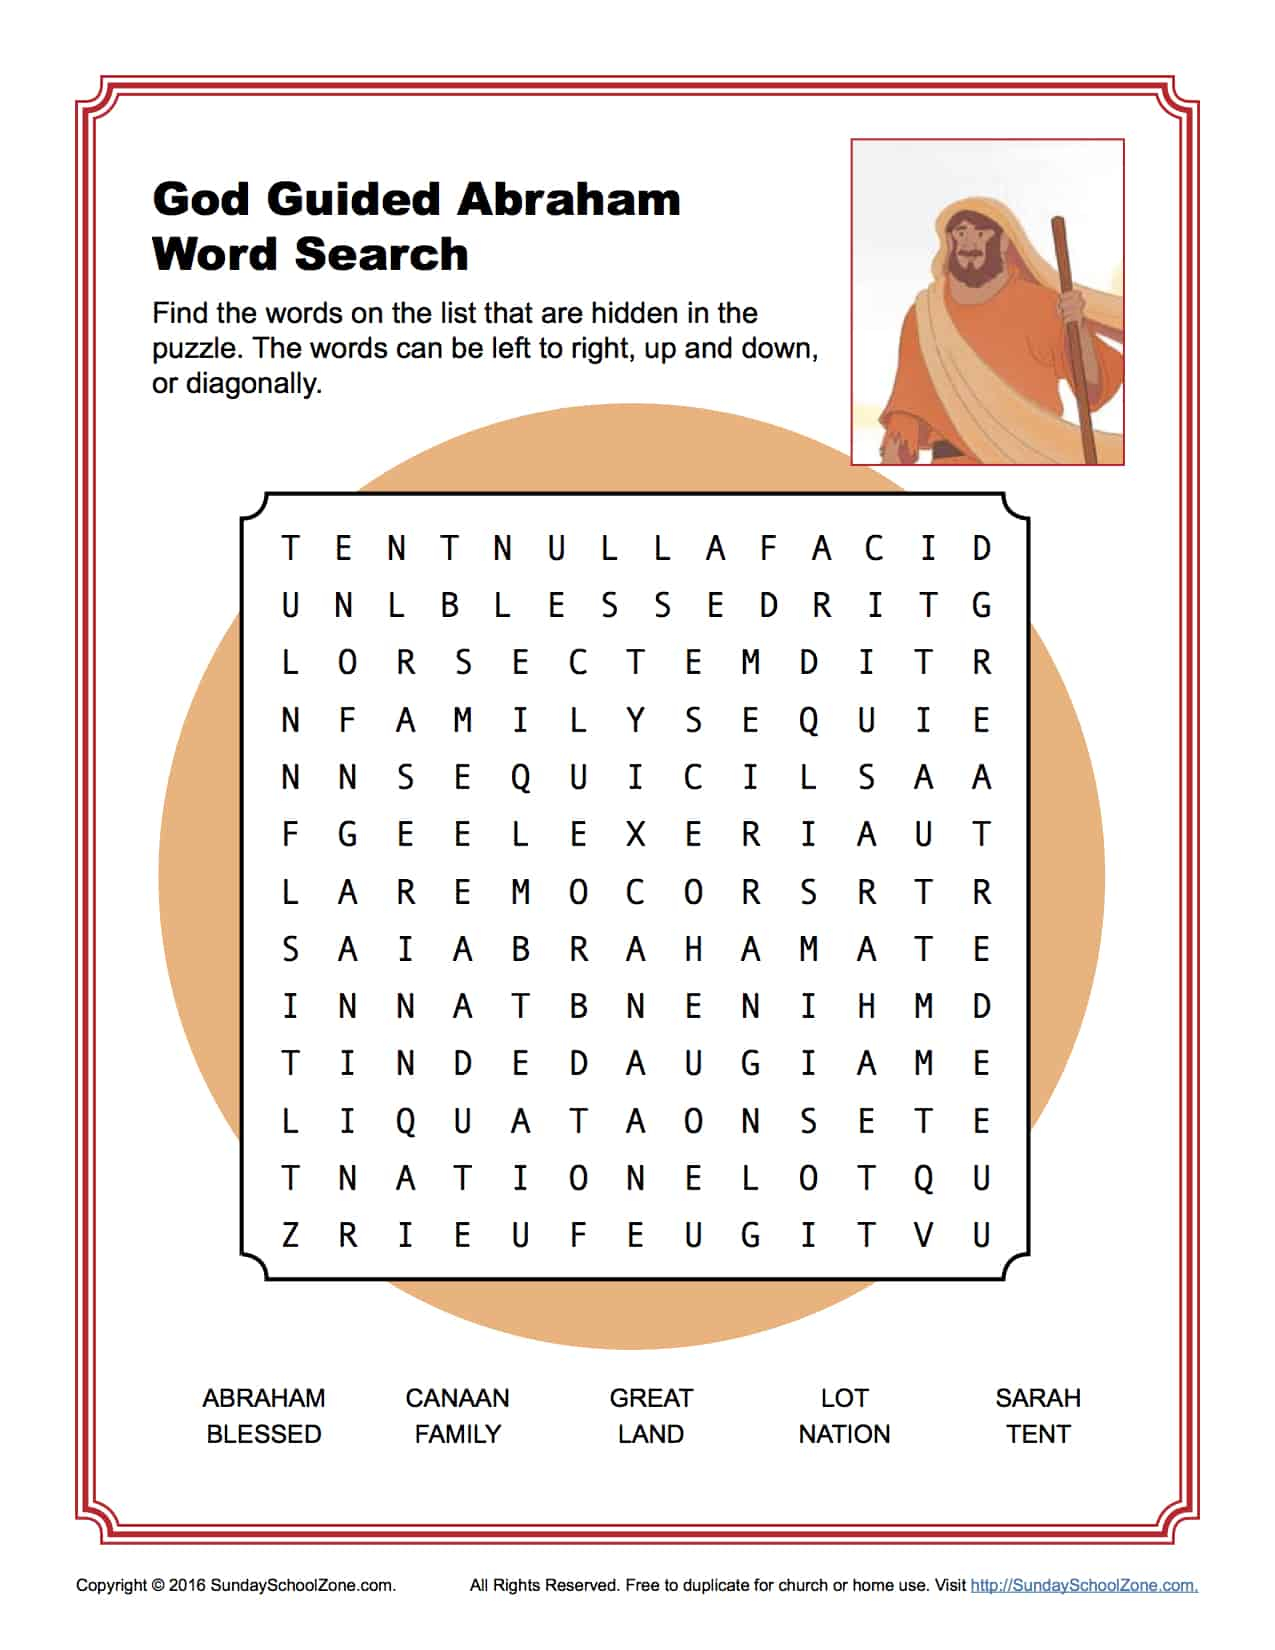 God Guided Abraham Word Search Children s Bible 